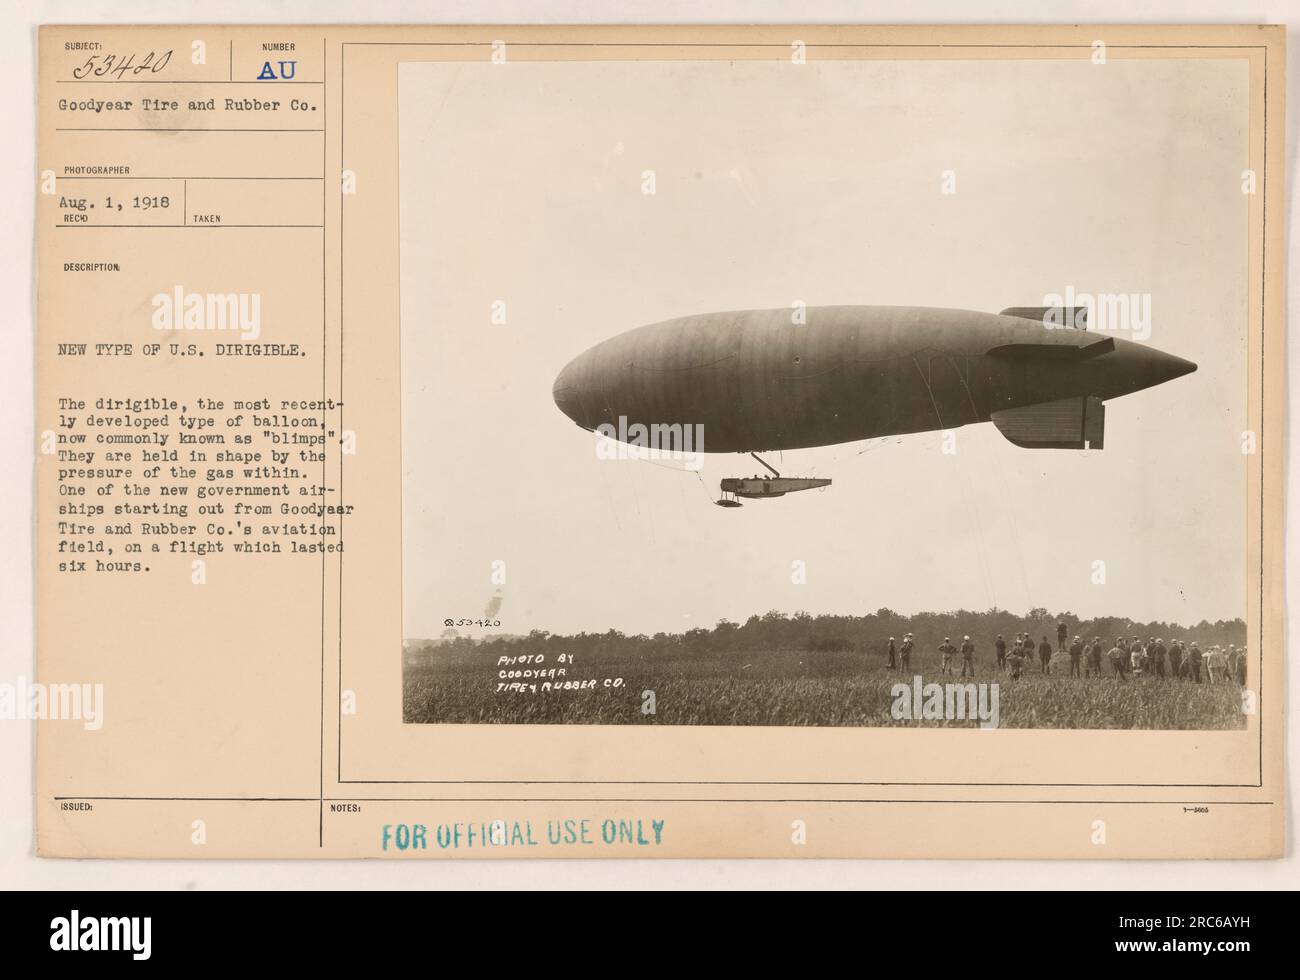 A new type of U.S. dirigible known as 'blimps', at Goodyear Tire and Rubber Co.'s aviation field. These airships are held in shape by the gas pressure within, allowing for flights lasting up to six hours. Photograph taken by Goodyear Tires Rubber Co. on August 1, 1918. Stock Photo